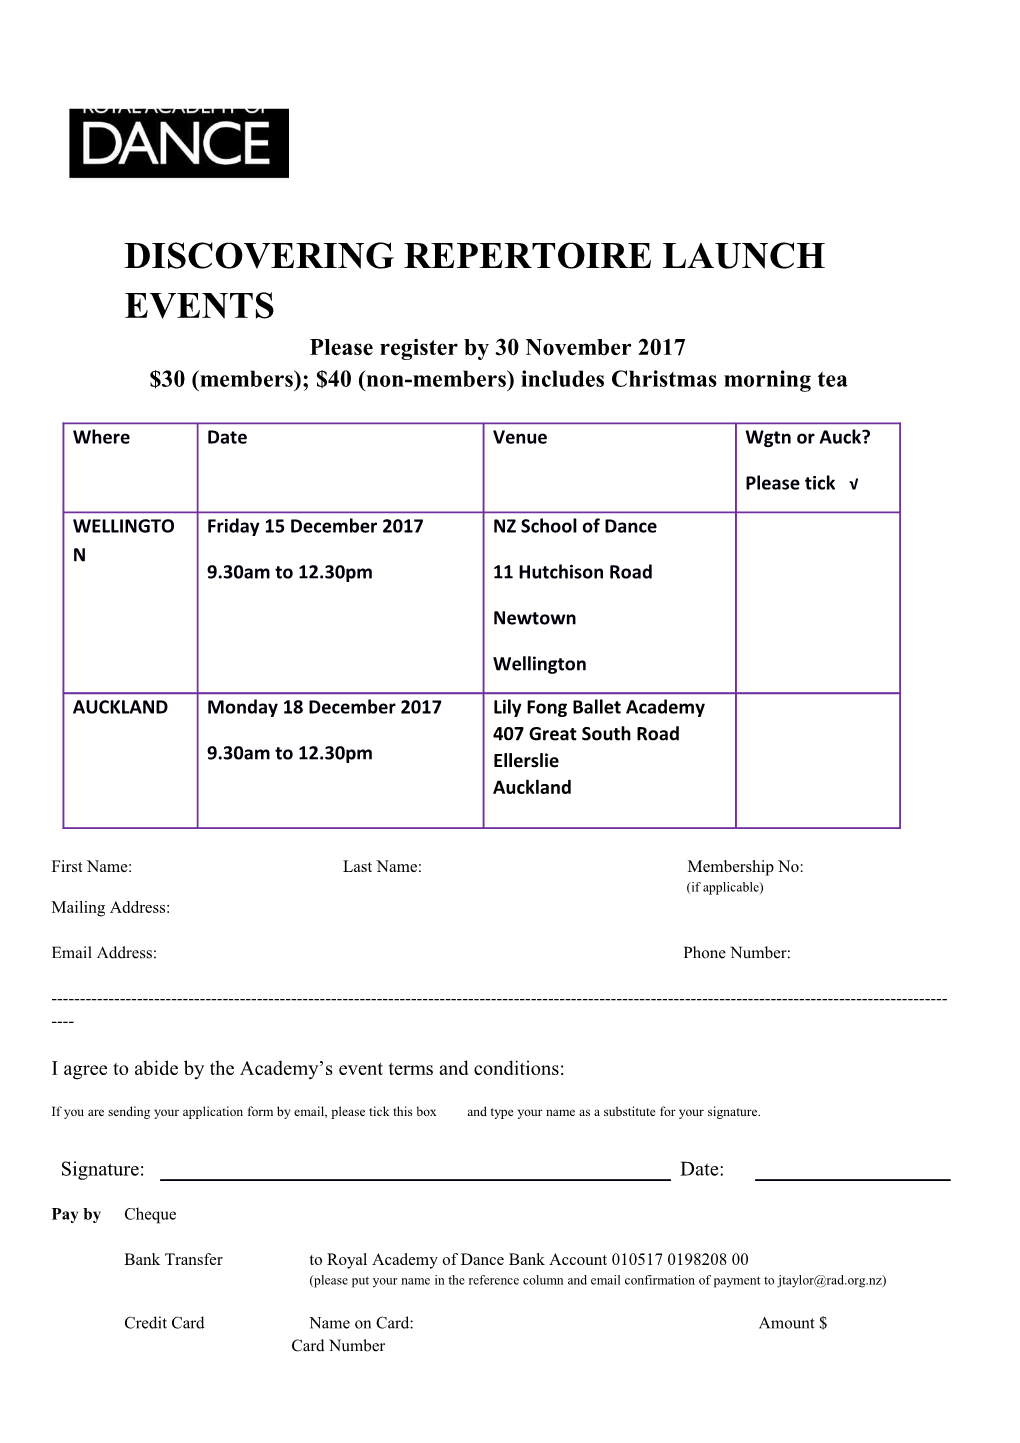 Discovering Repertoire Launch Events